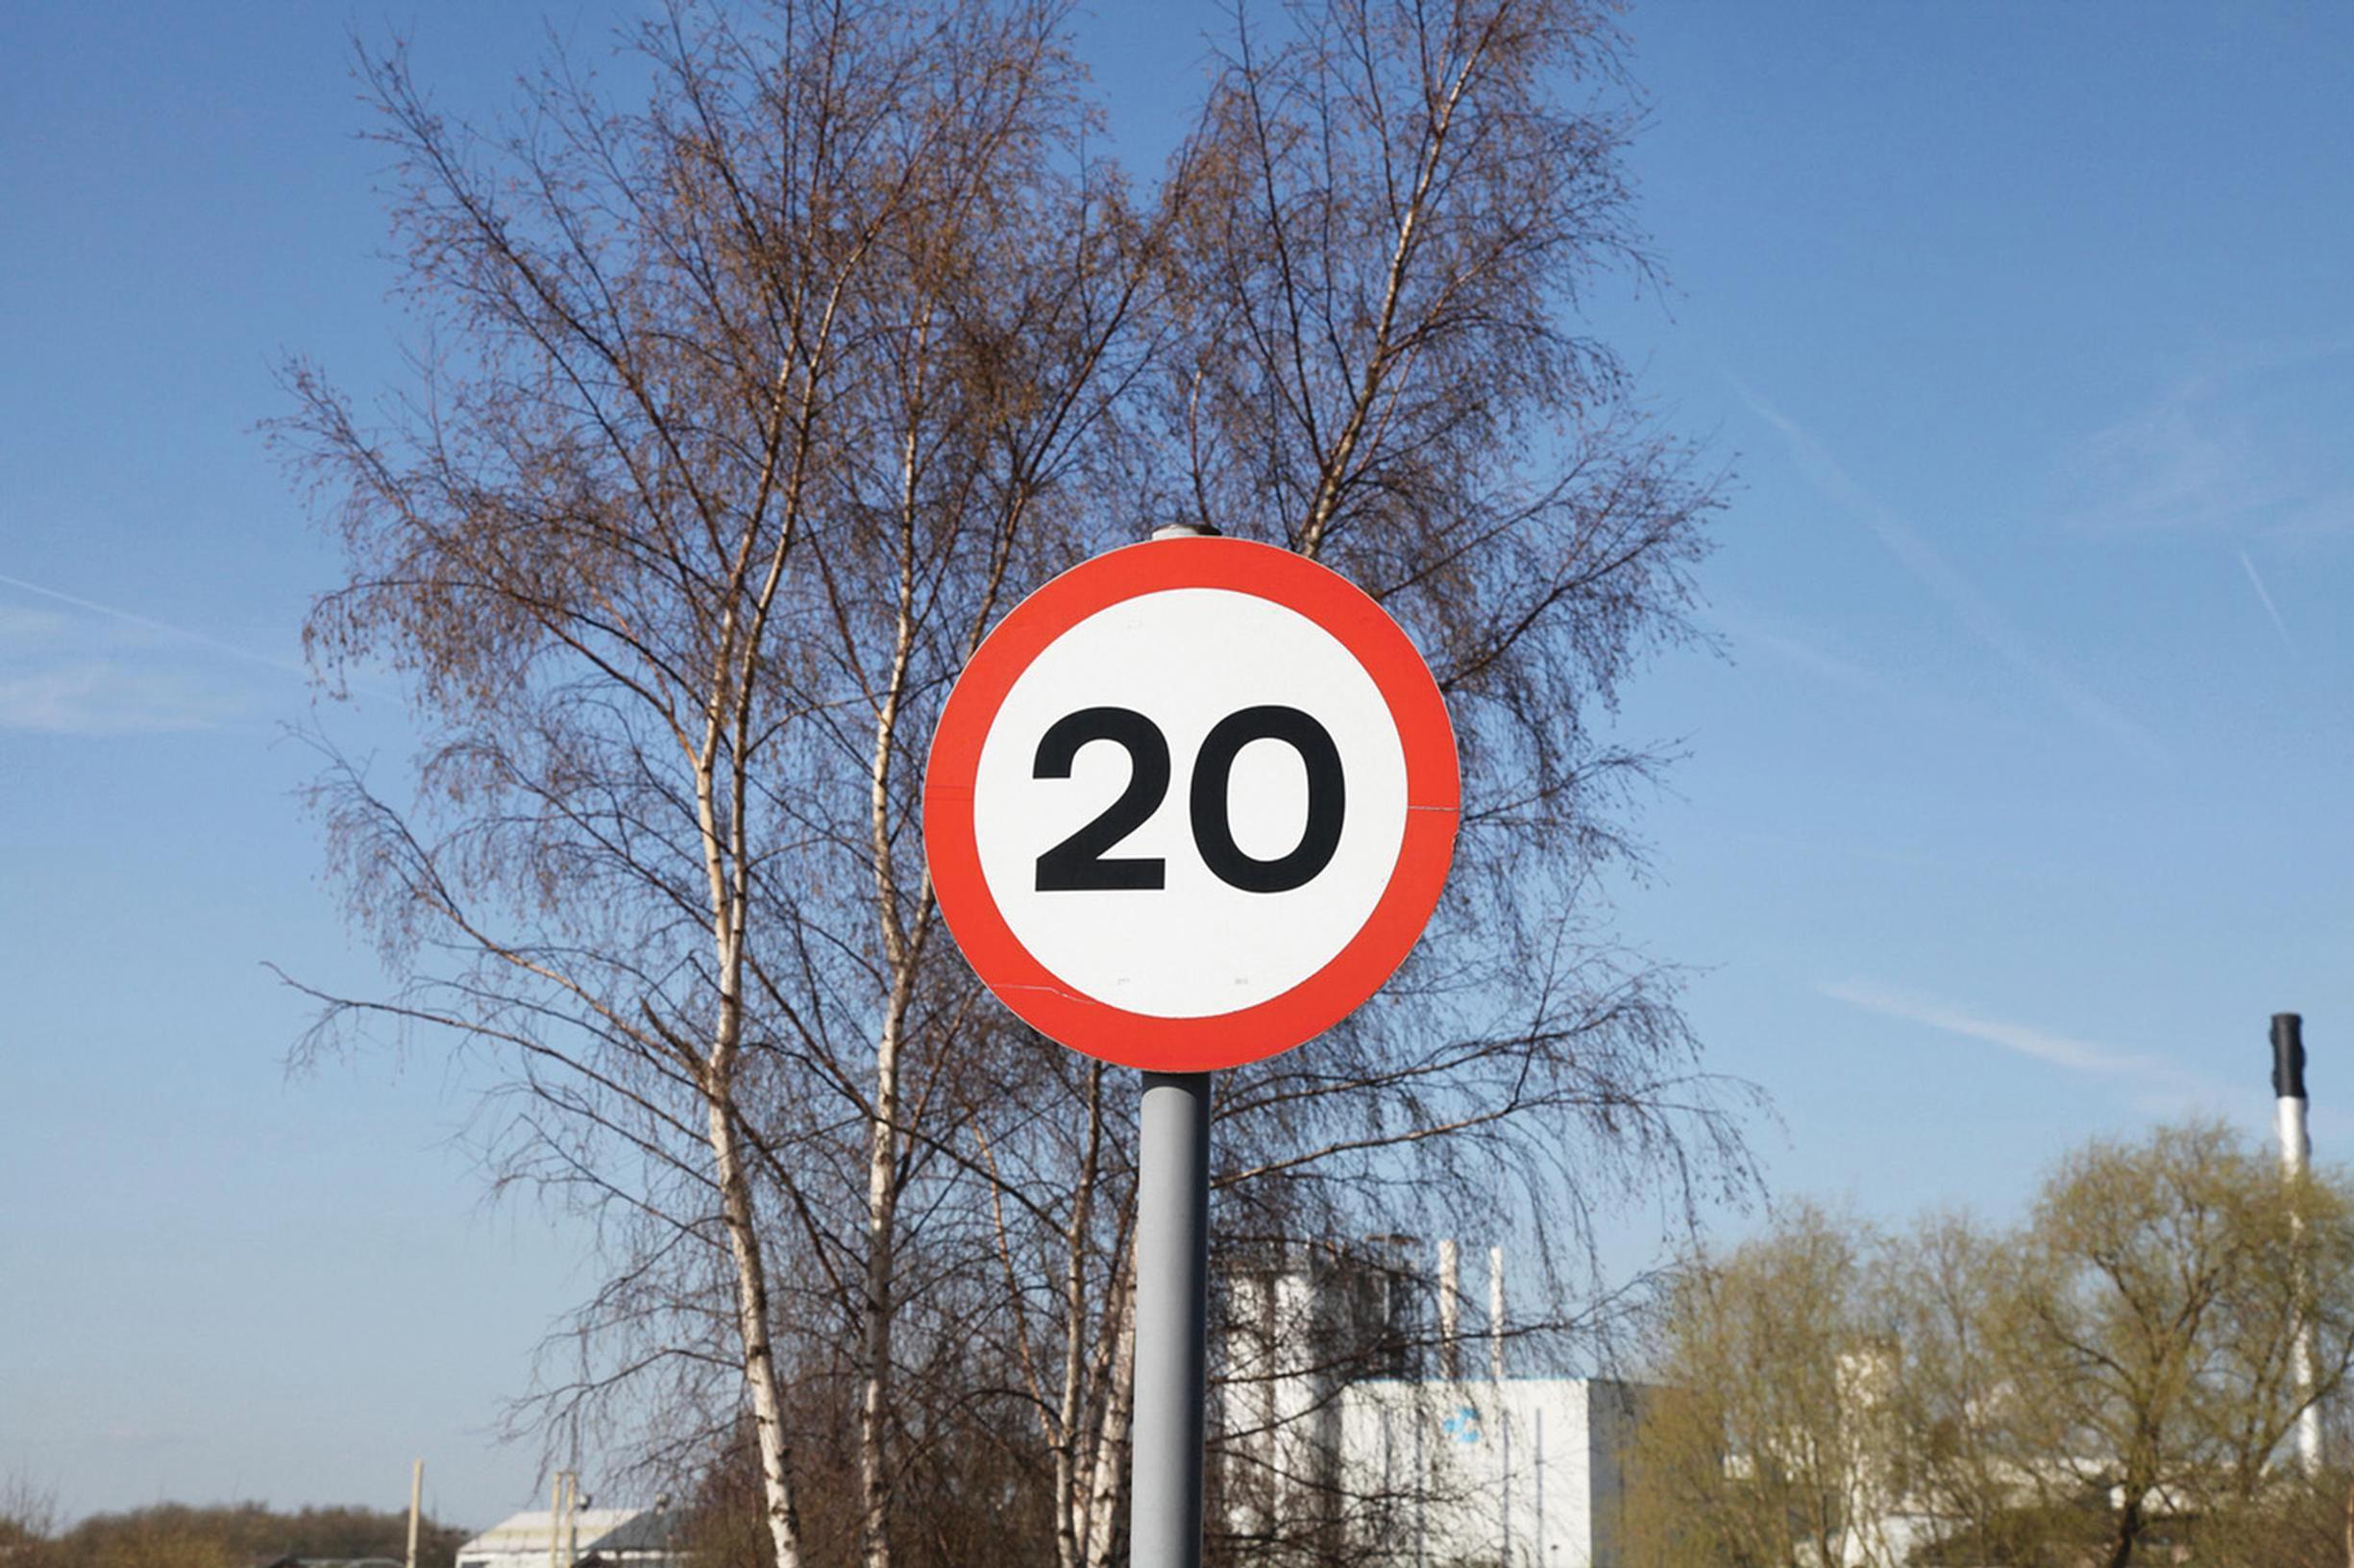 The DfT is seeking limit the use of areawide 20mph zones